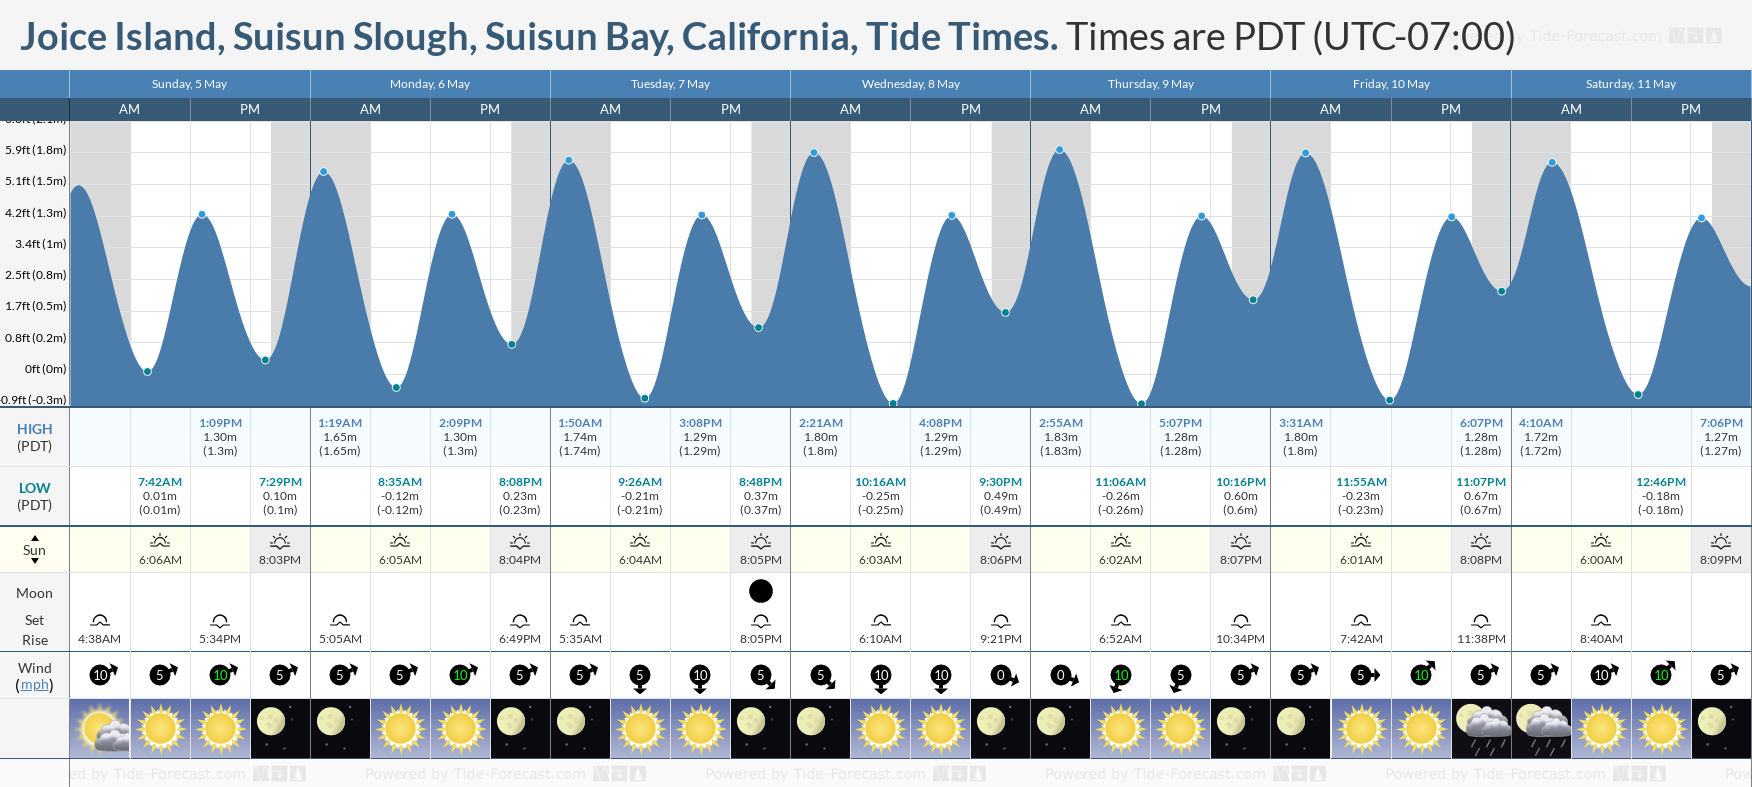 Joice Island, Suisun Slough, Suisun Bay, California Tide Chart including high and low tide tide times for the next 7 days